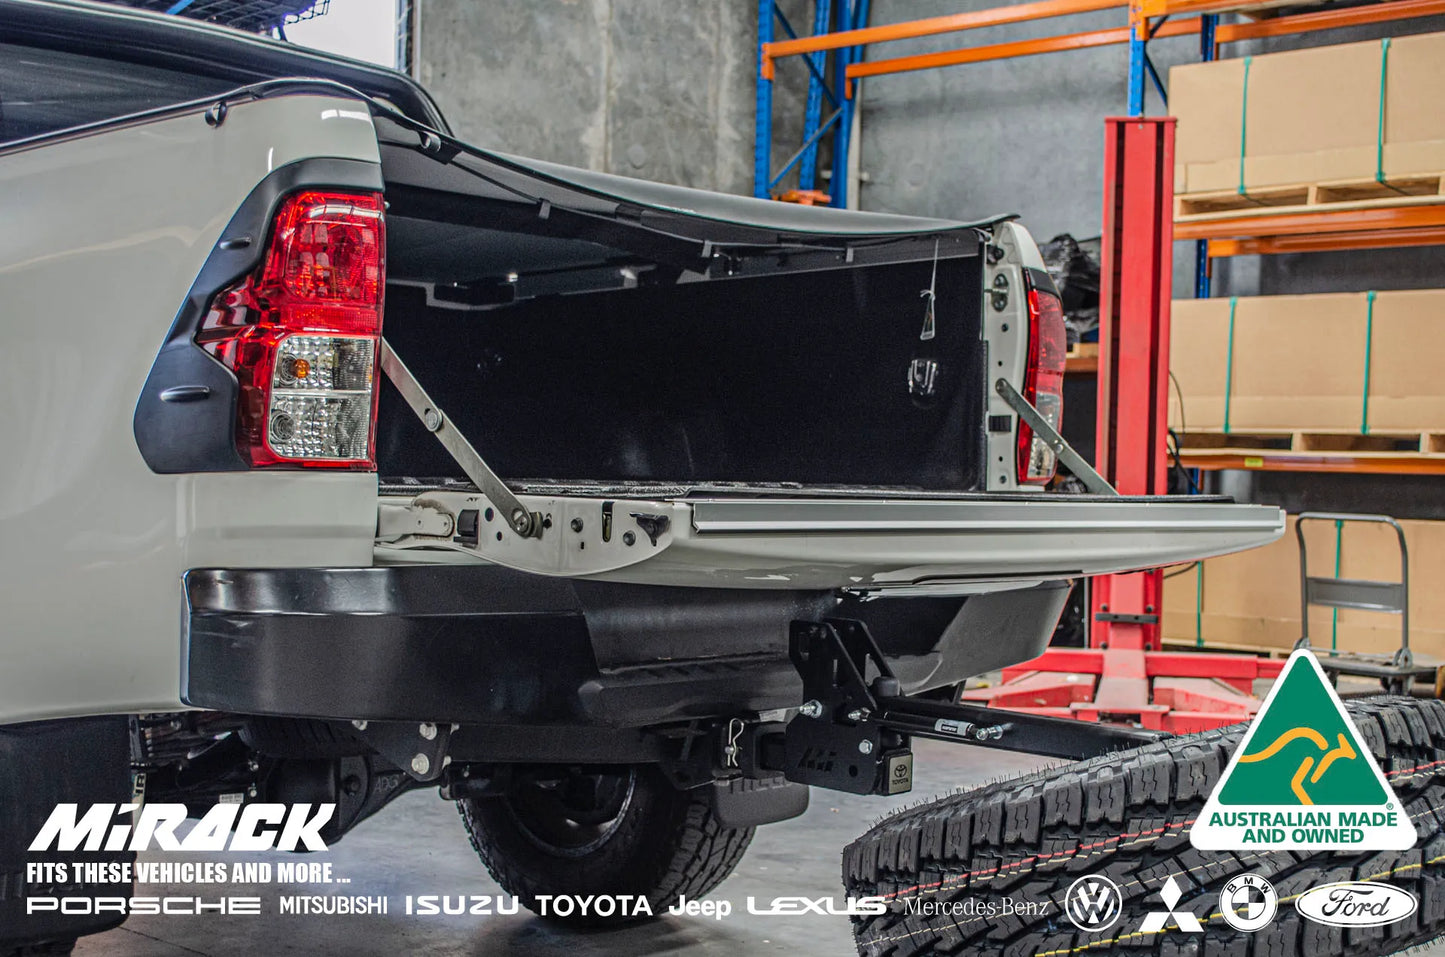 Unlock the full potential of your Toyota Hilux SR5's rear space and off-road capabilities with this rugged Mirack tilting spare tyre carrier, conveniently mounted on the tow hitch. Access the spare tyre effortlessly and keep the rear cargo space clutter-free for your next adventure.